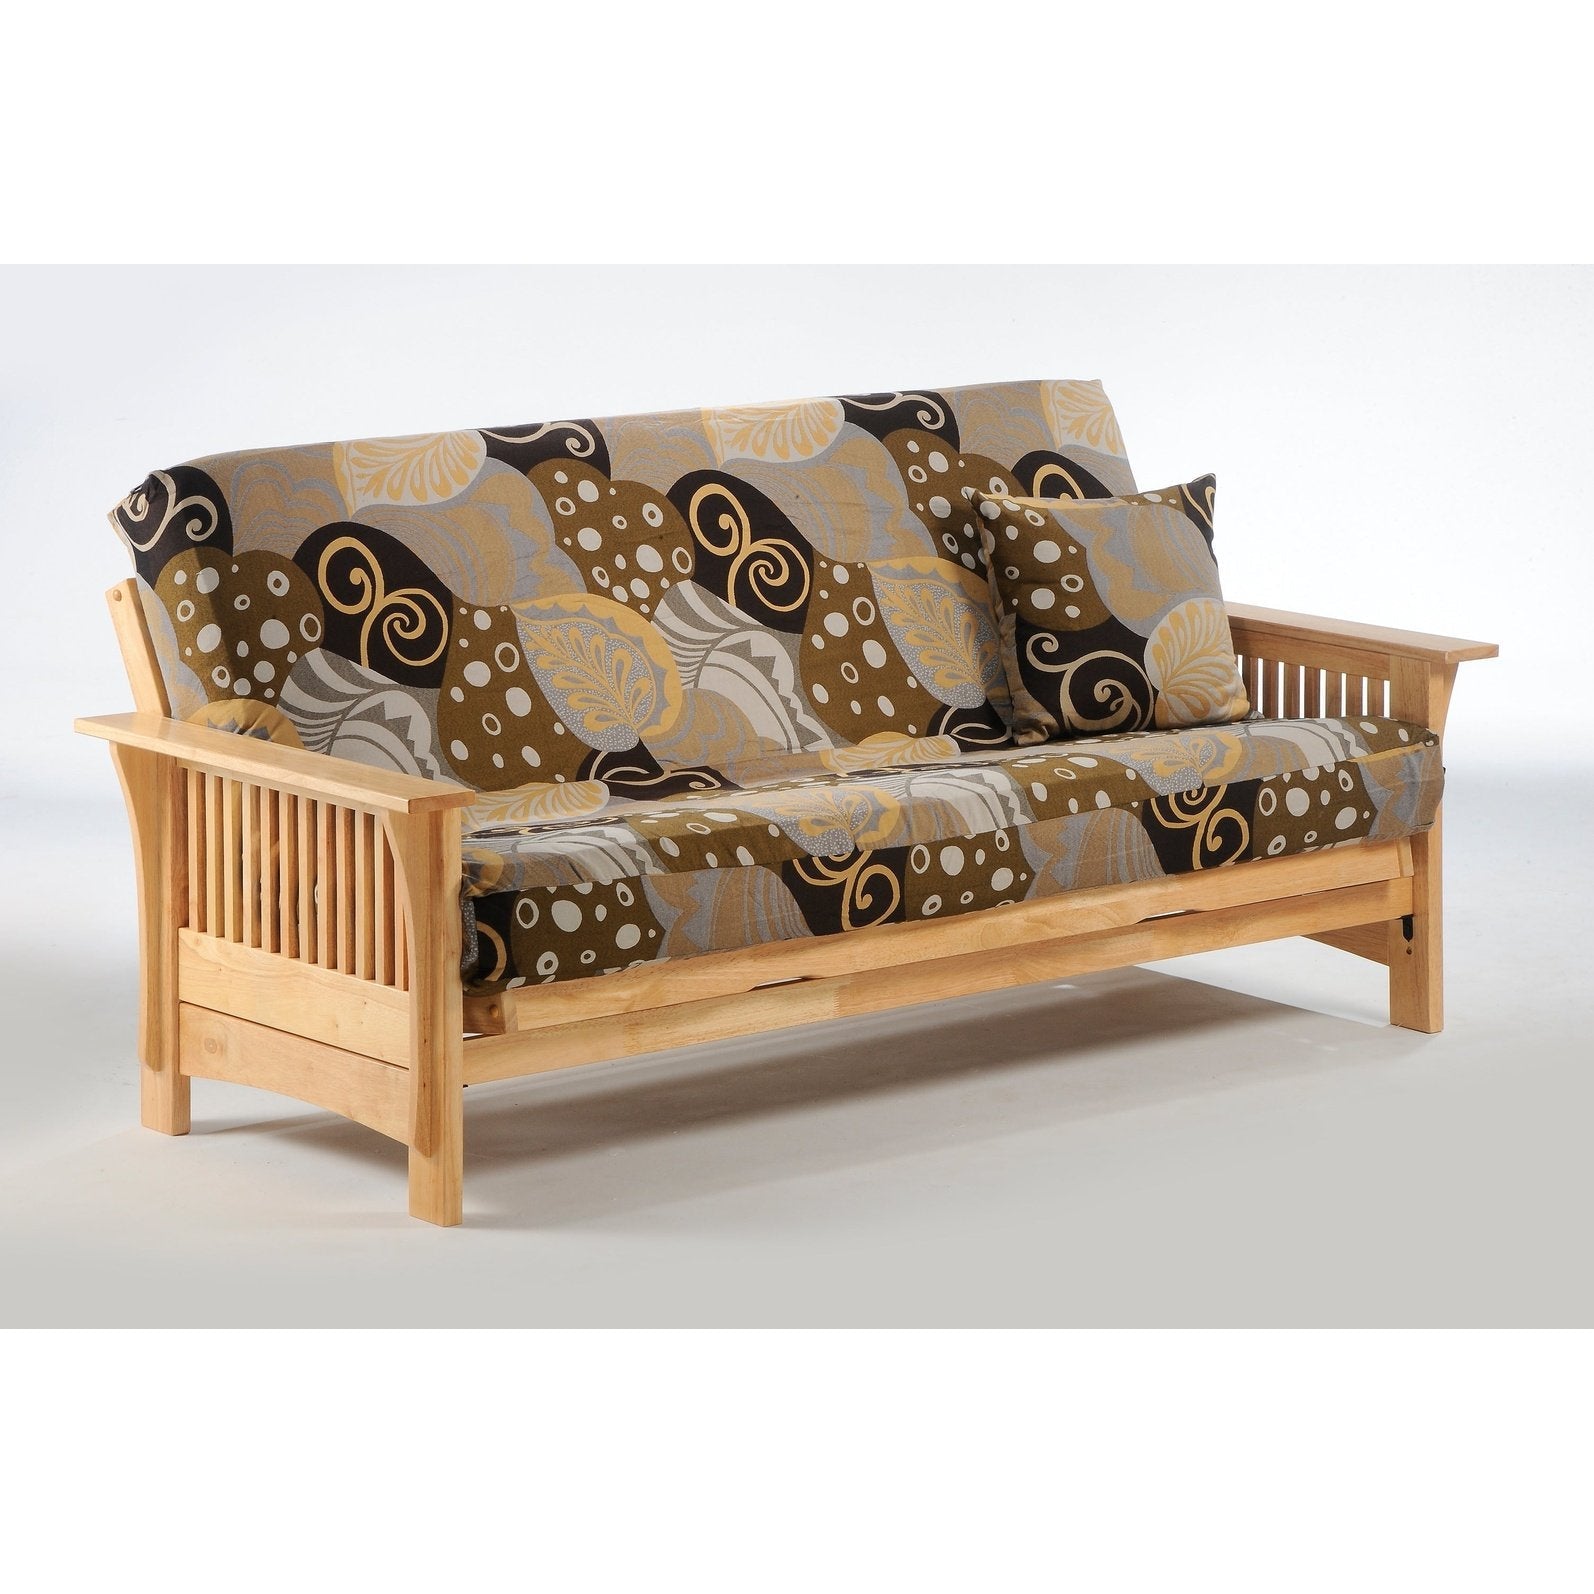 Night and Day Furniture Autumn Standard Futon Frame Complete